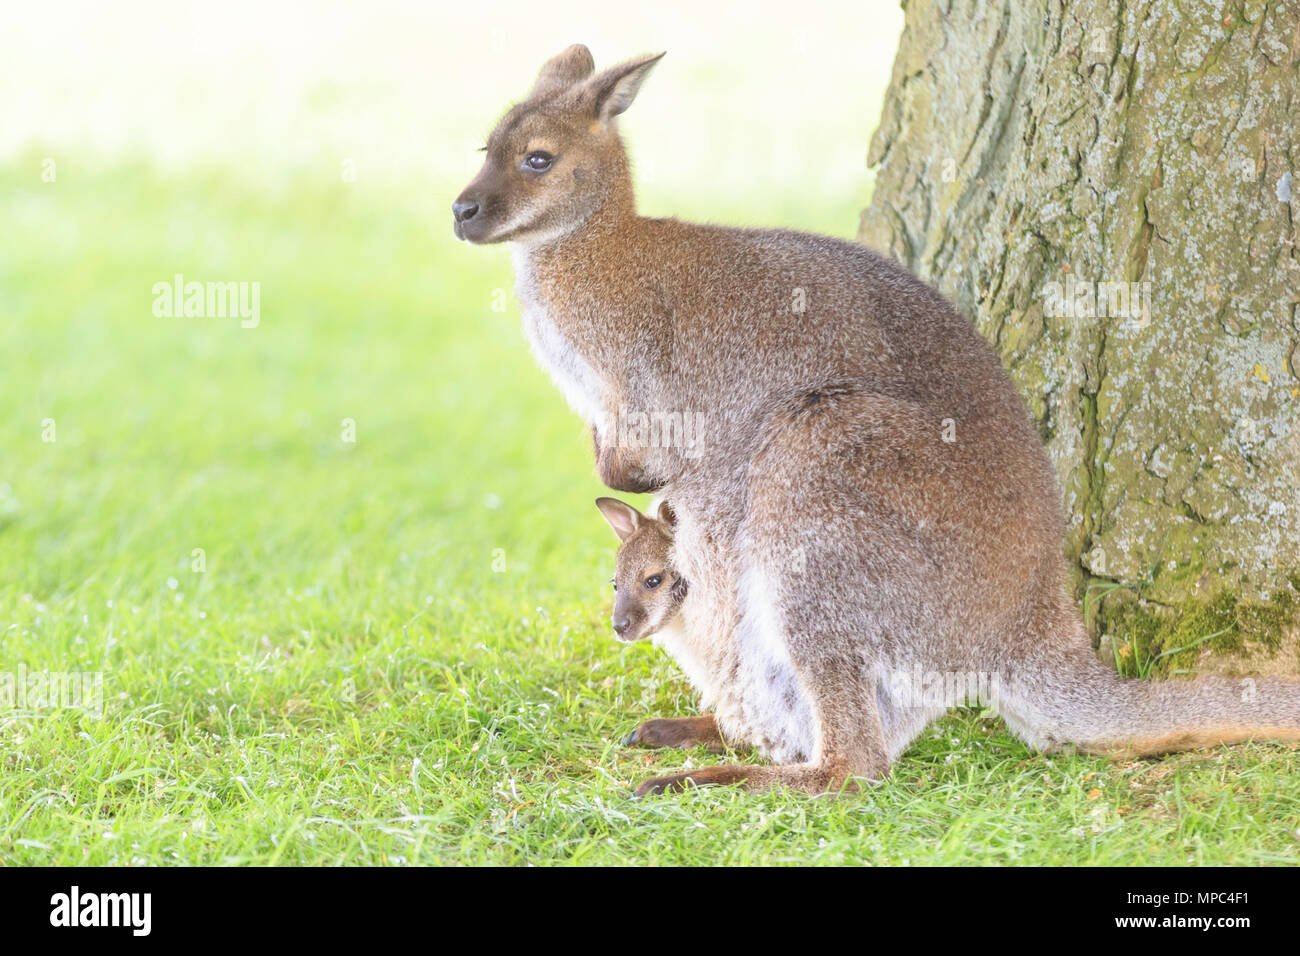 ZSL Whipsnade, Bedfordshire, 22nd May 2018. A baby wallaby, known as a joey, peeks out of its protective mum's pouch, then ventures out for some exploration on a warm and sunny afternoon at ZSL Whipsnade Zoo in Befordshire. Whipsade has a large resident group of Bennett’s Wallabies (Macropus rufogriseus), also called red necked wallabies. Joeys remain in their mum's pouch for nine month after birth, before starting to venture out into the world, but often skipping back to safety in the pouch. Credit: Imageplotter News and Sports/Alamy Live News Stock Photo